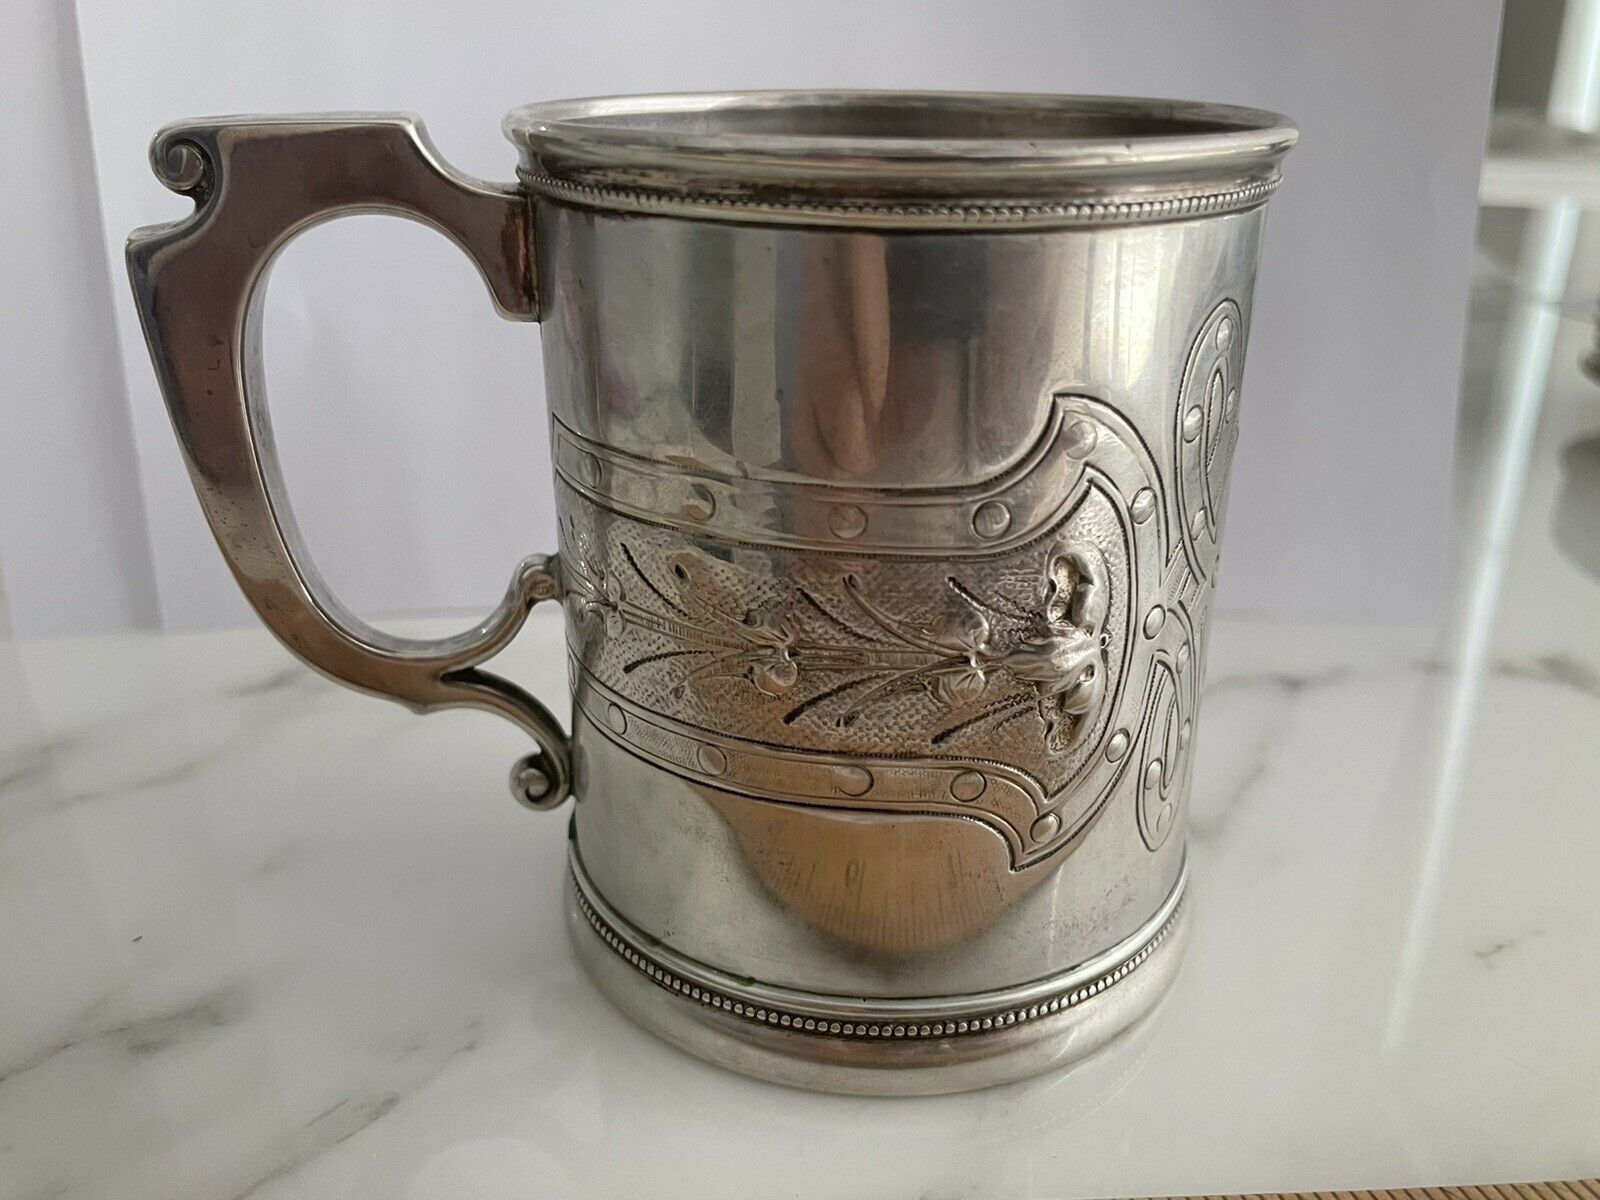 Antique Gorham Coin Christening Baby Cup COIN Sterling Silver Crisp c 1865